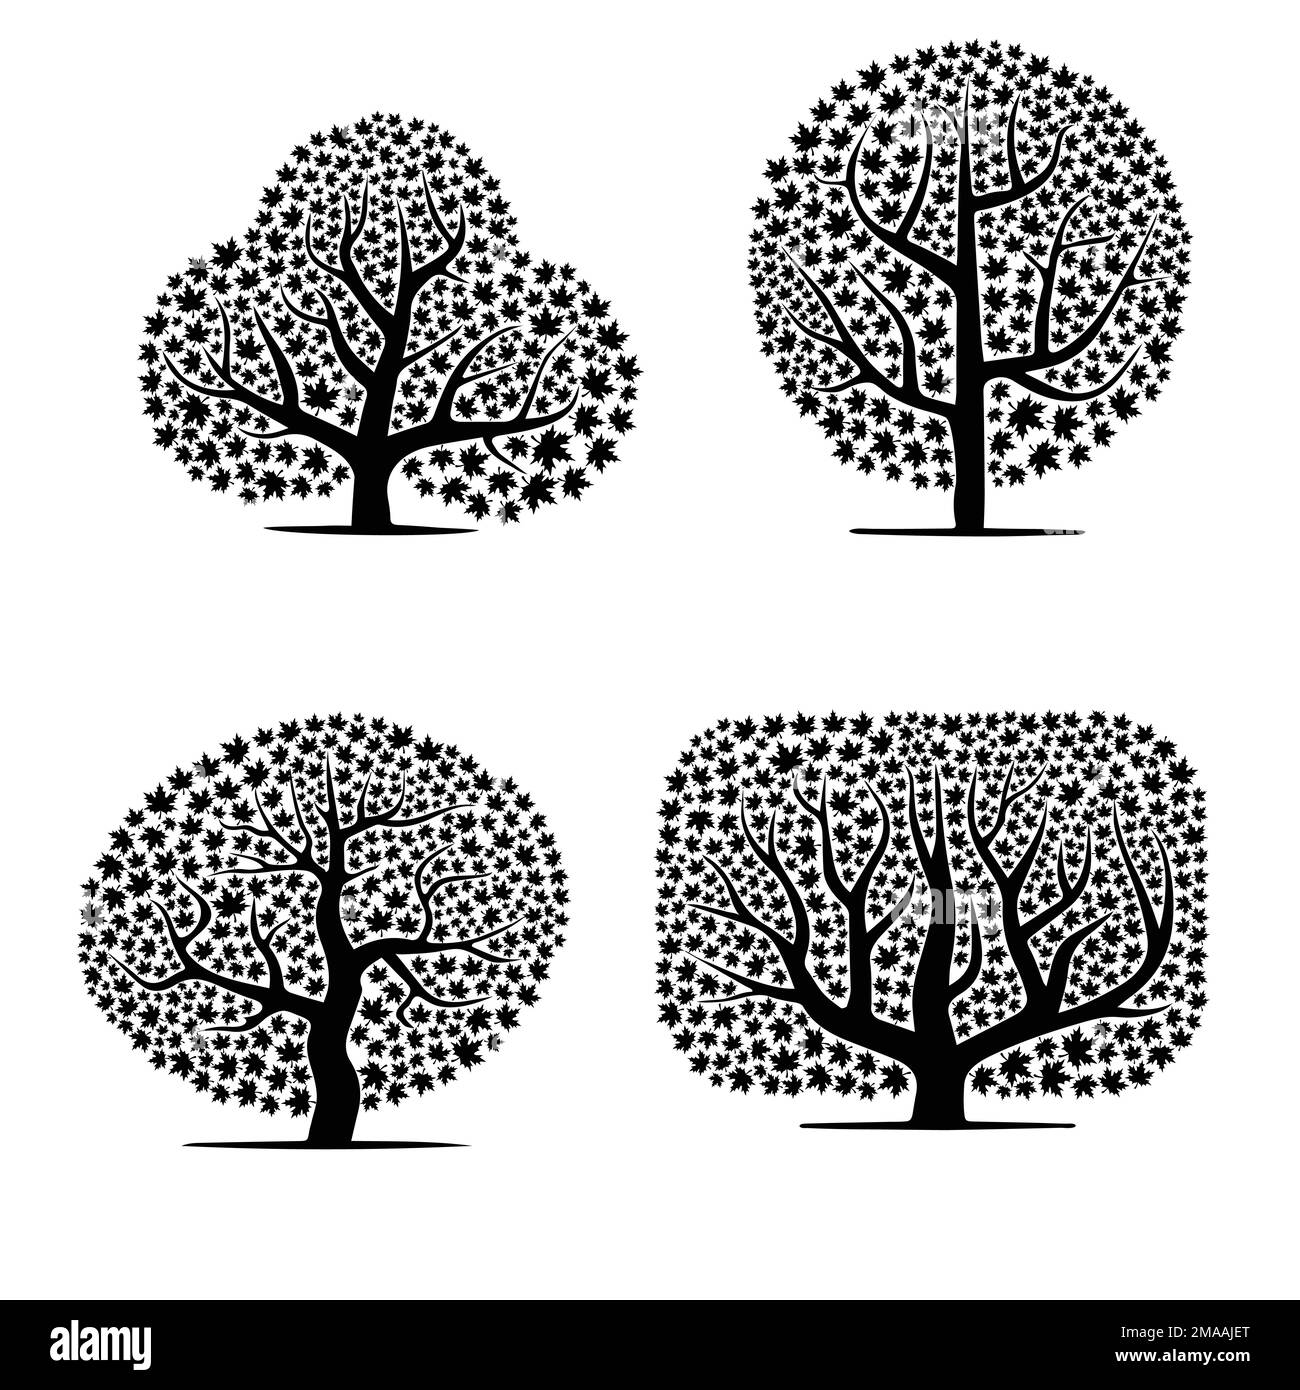 Abstract maple leaves black tree silhouettes set Stock Vector